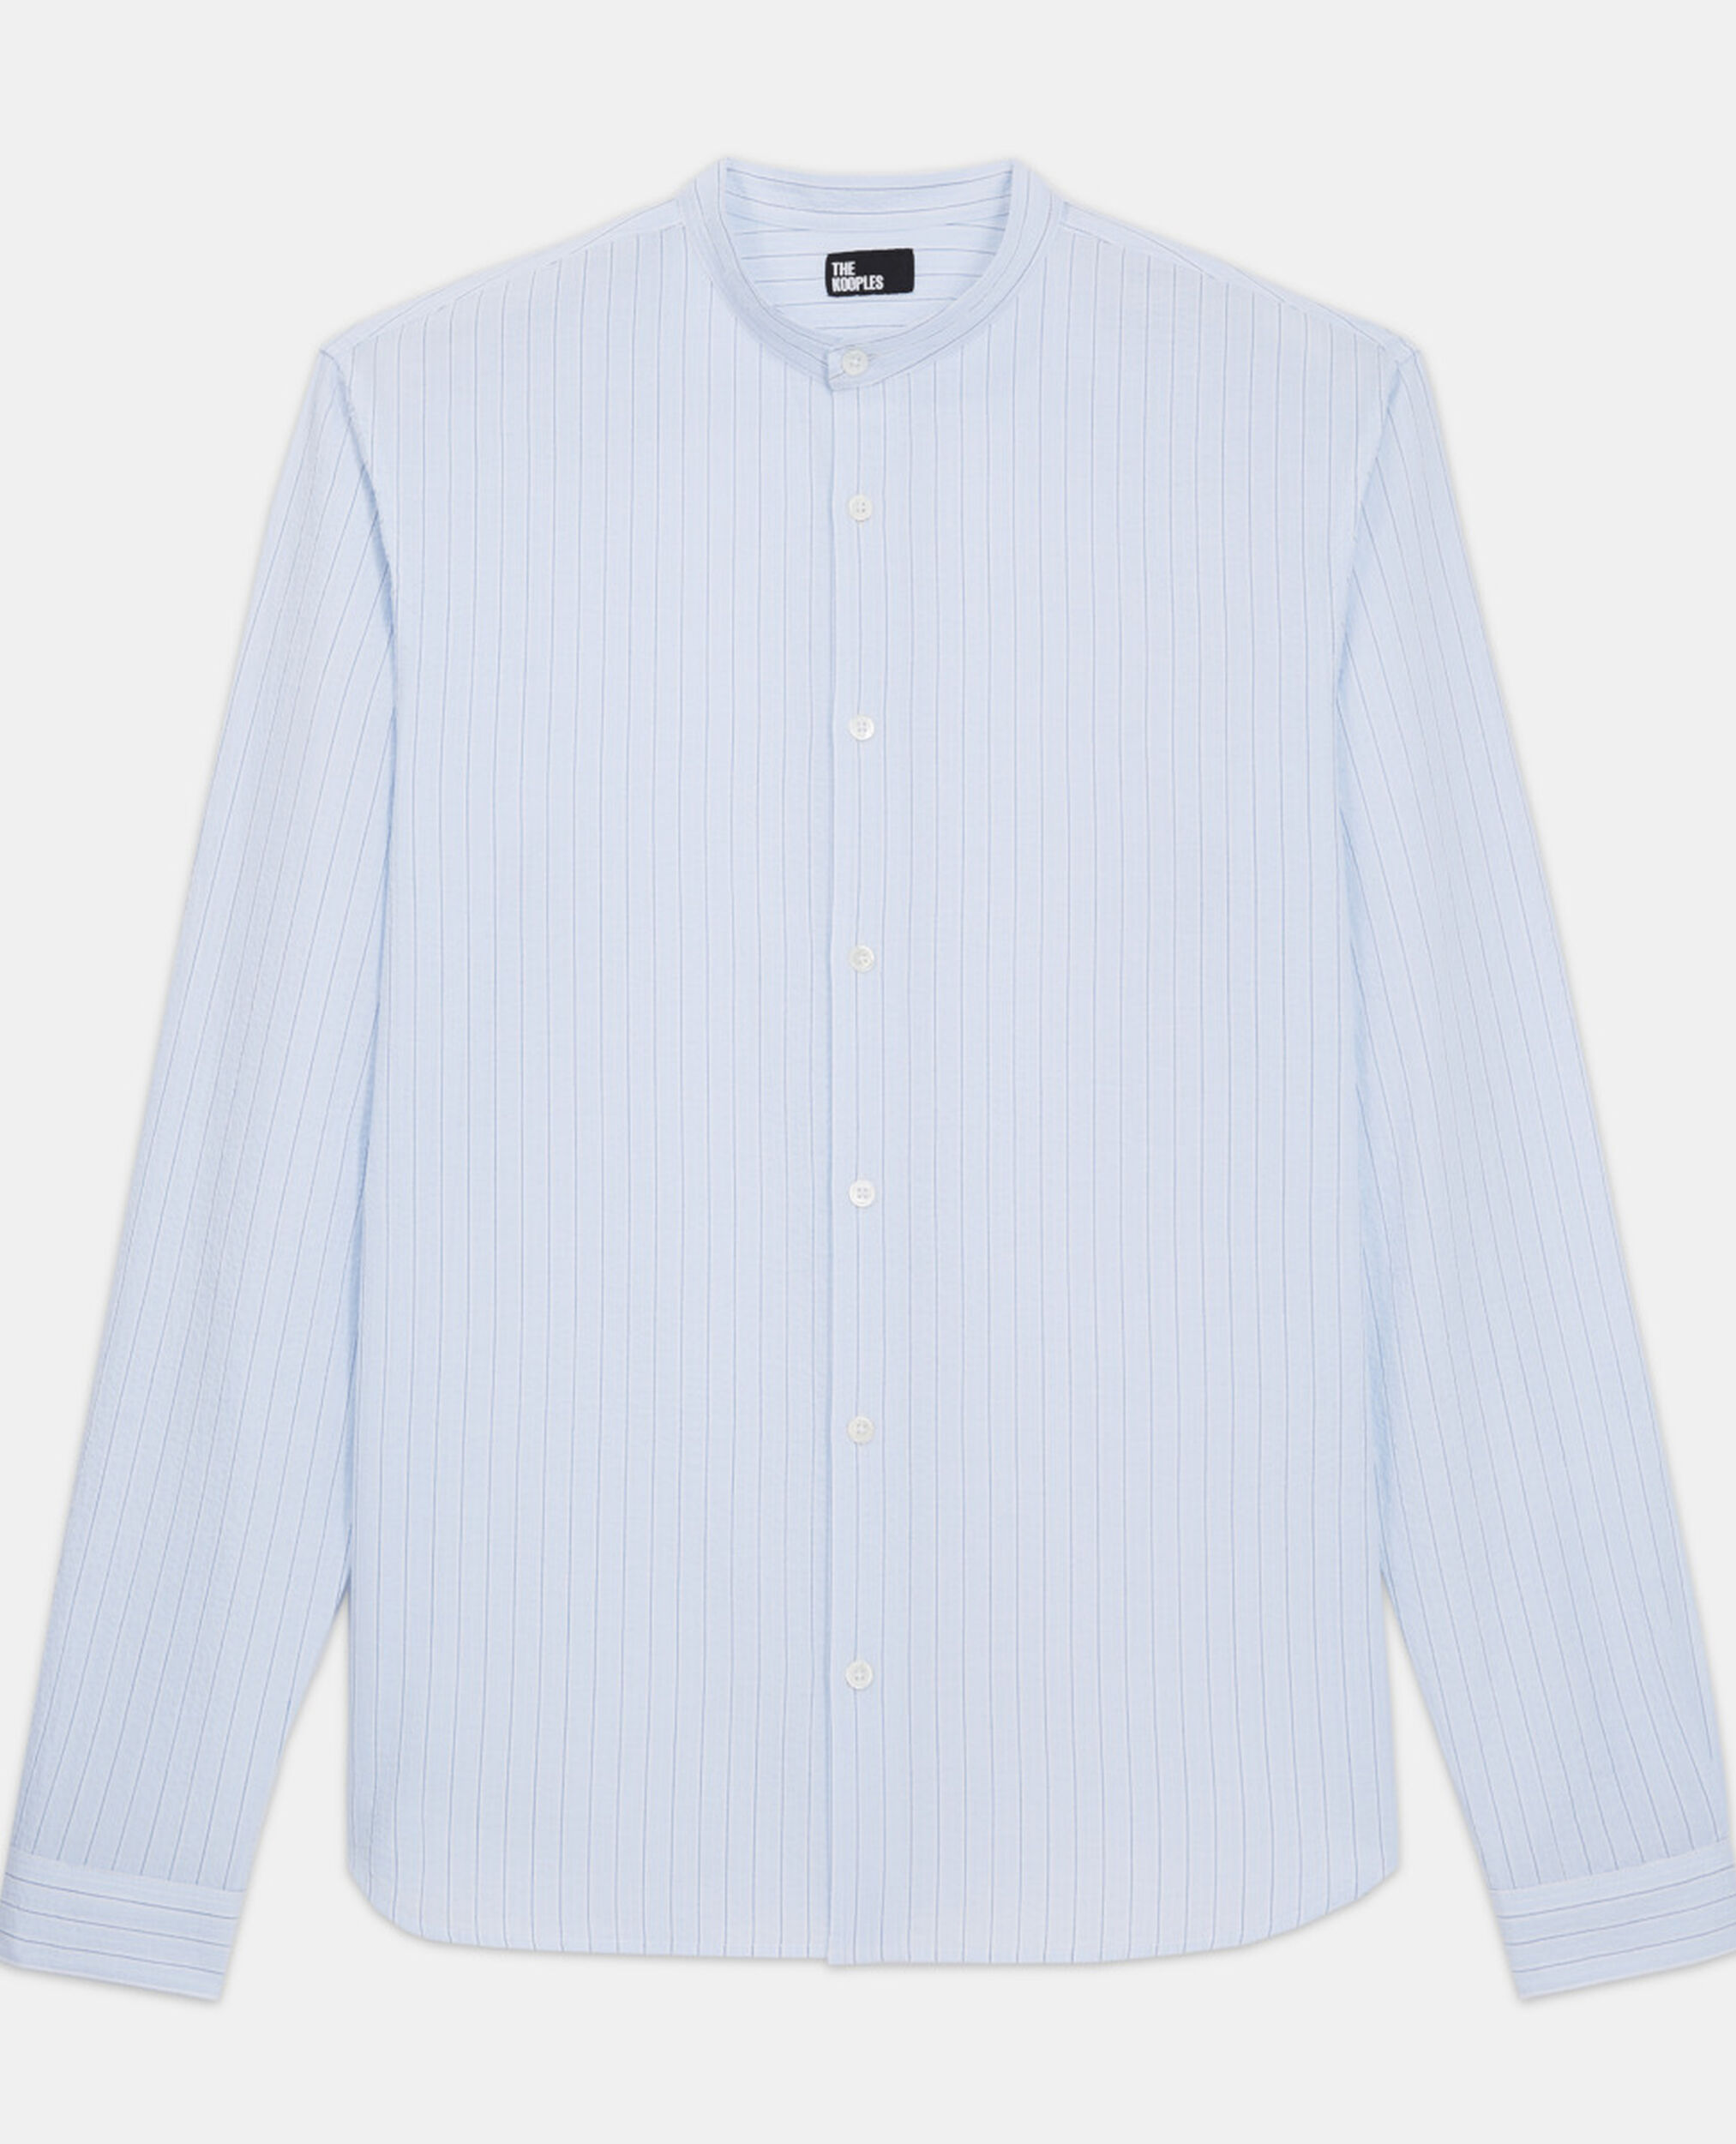 Striped shirt with Mao-neck, WHITE / SKY BLUE, hi-res image number null